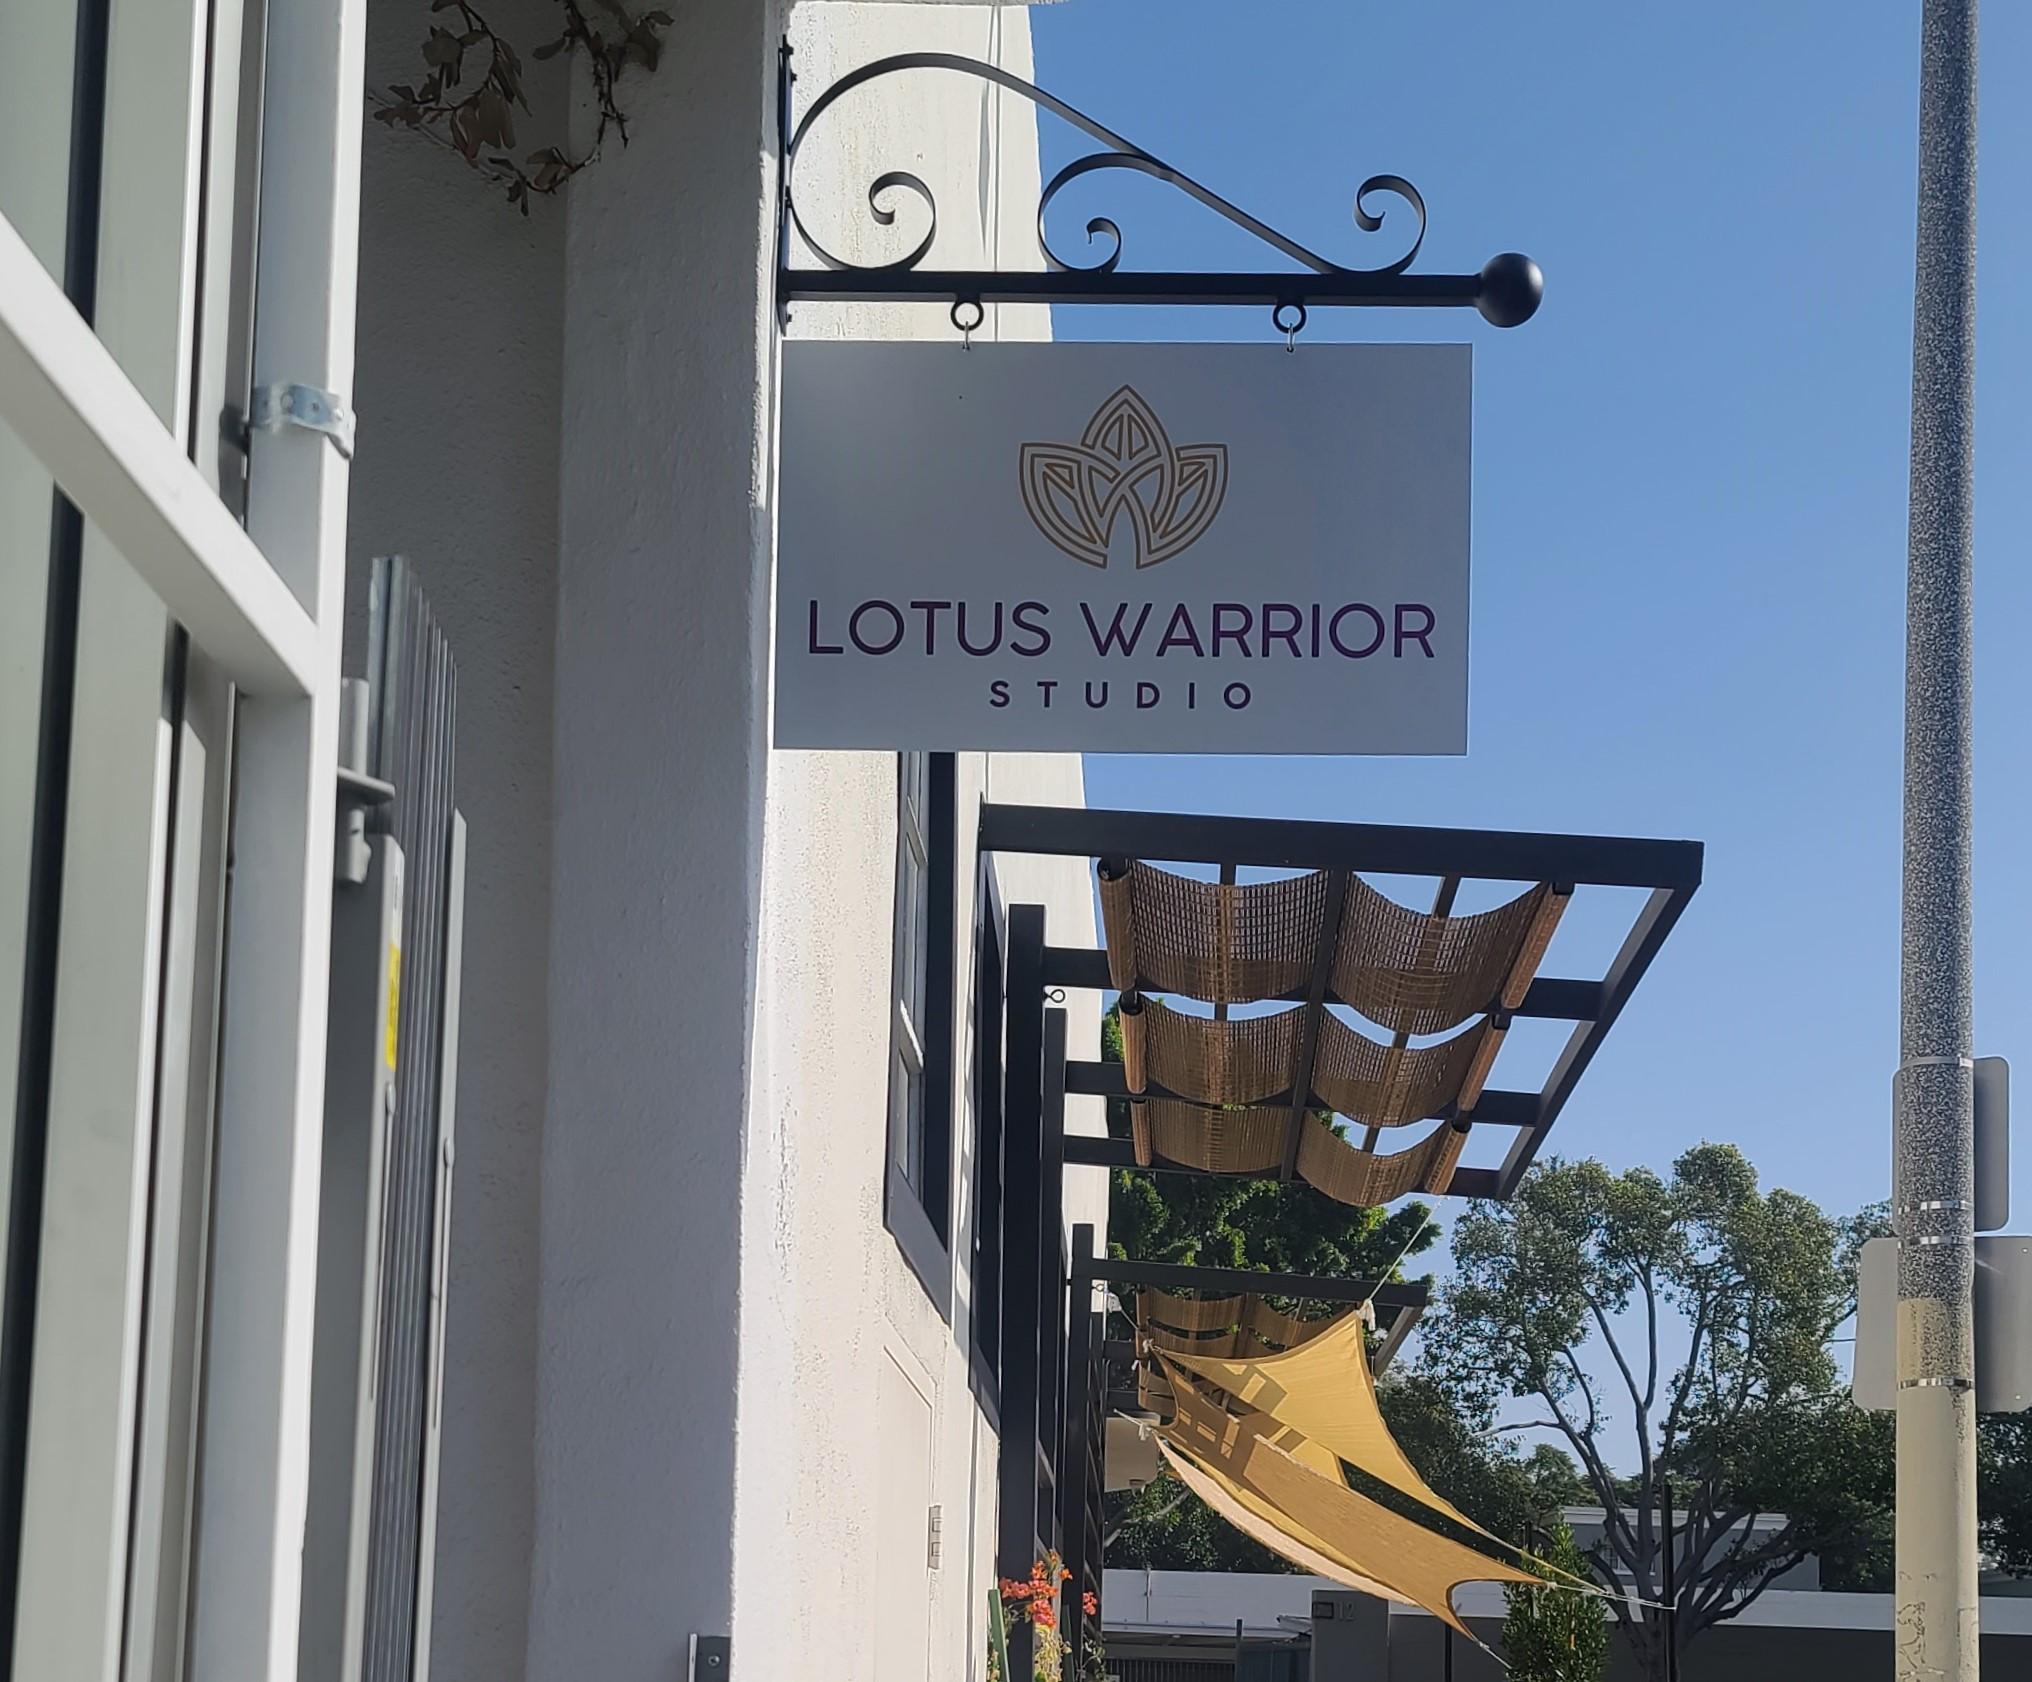 This is the blade sign we fabricated and installed for Lotus Warrior's Los Angeles yoga studio, it compliments the Dibond building sign we also made for them.